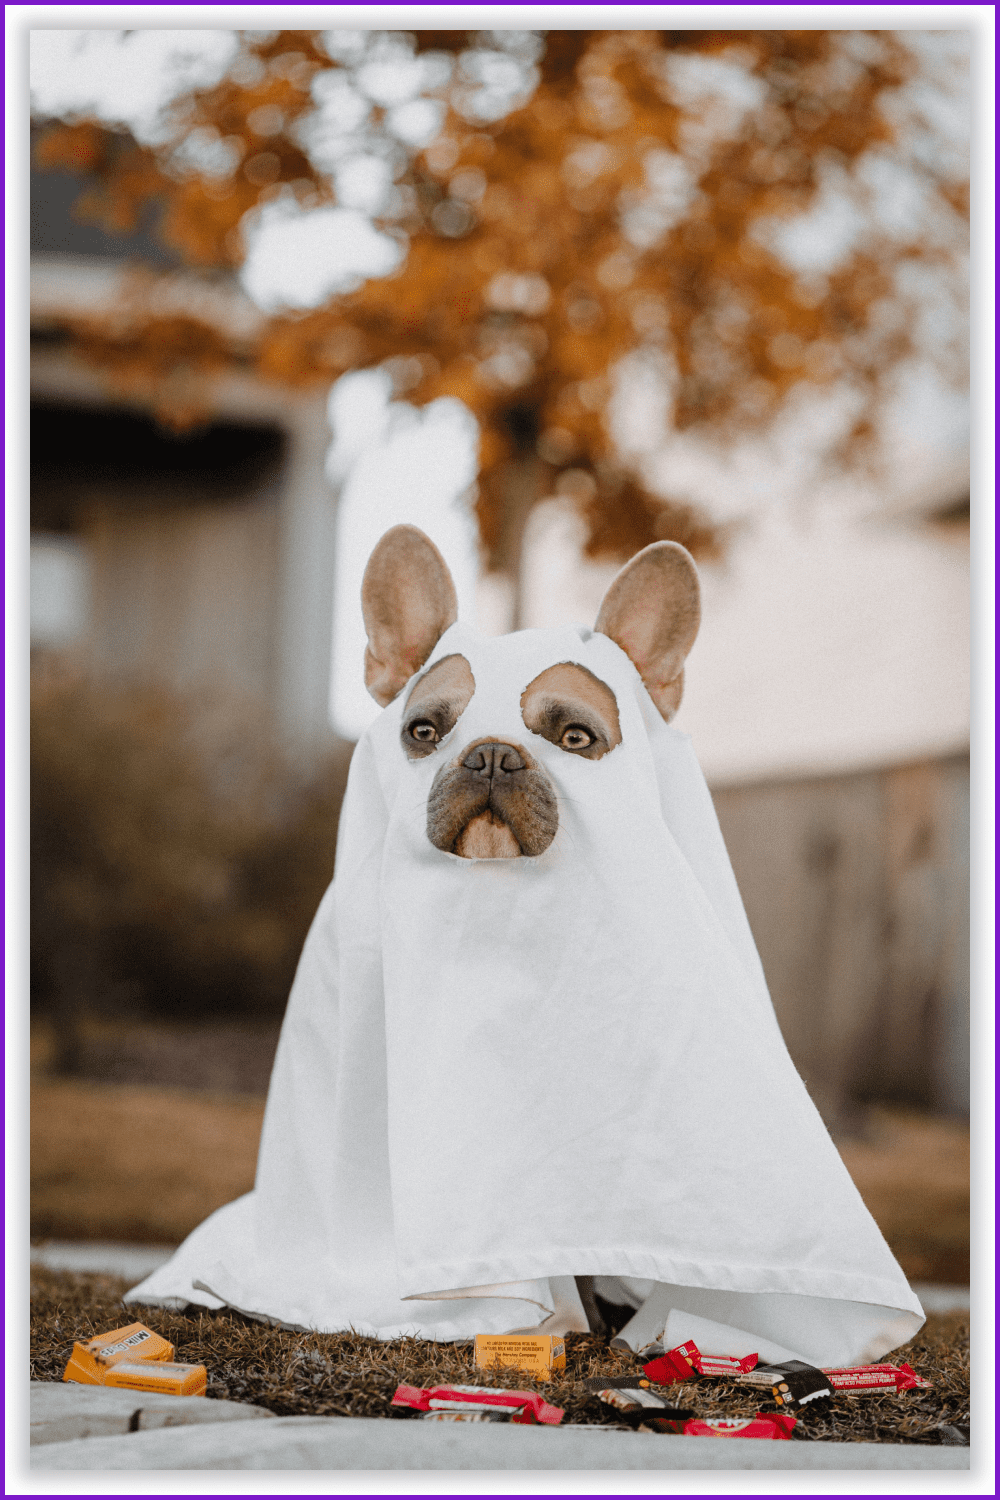 A little dog in a ghost costume.